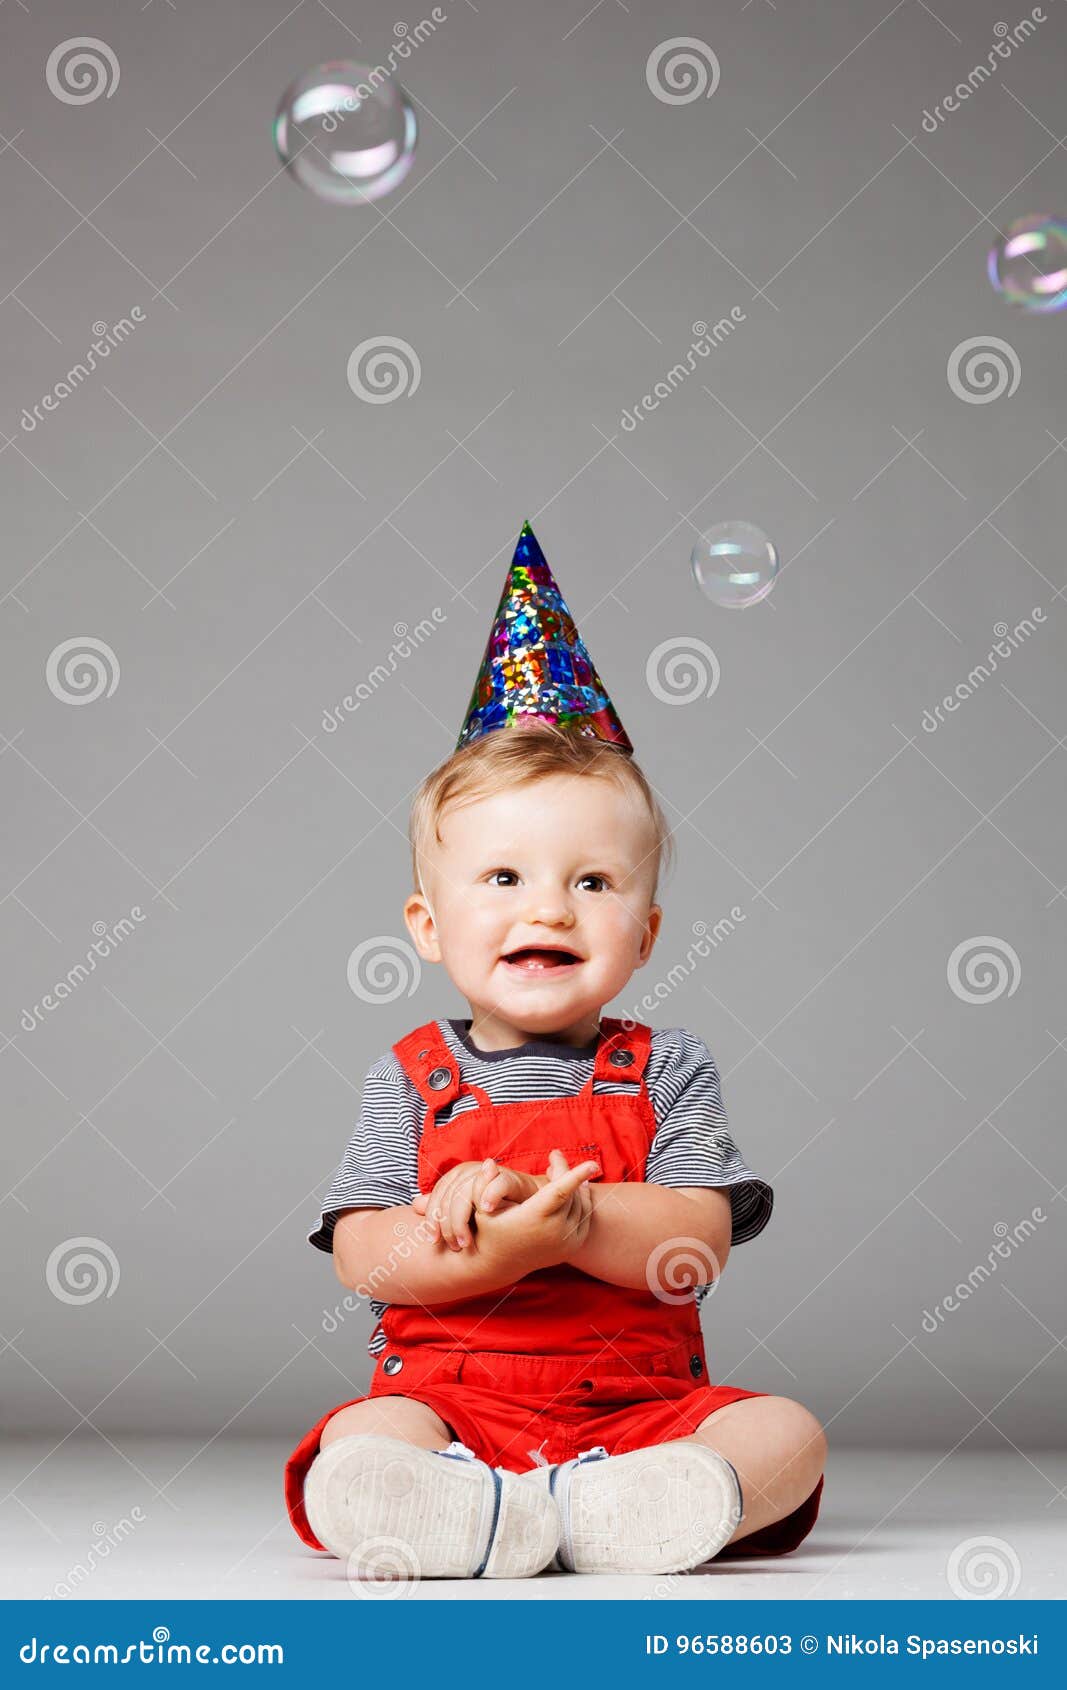 Baby Birthday Boy with Balloons Stock Image - Image of background, foam ...